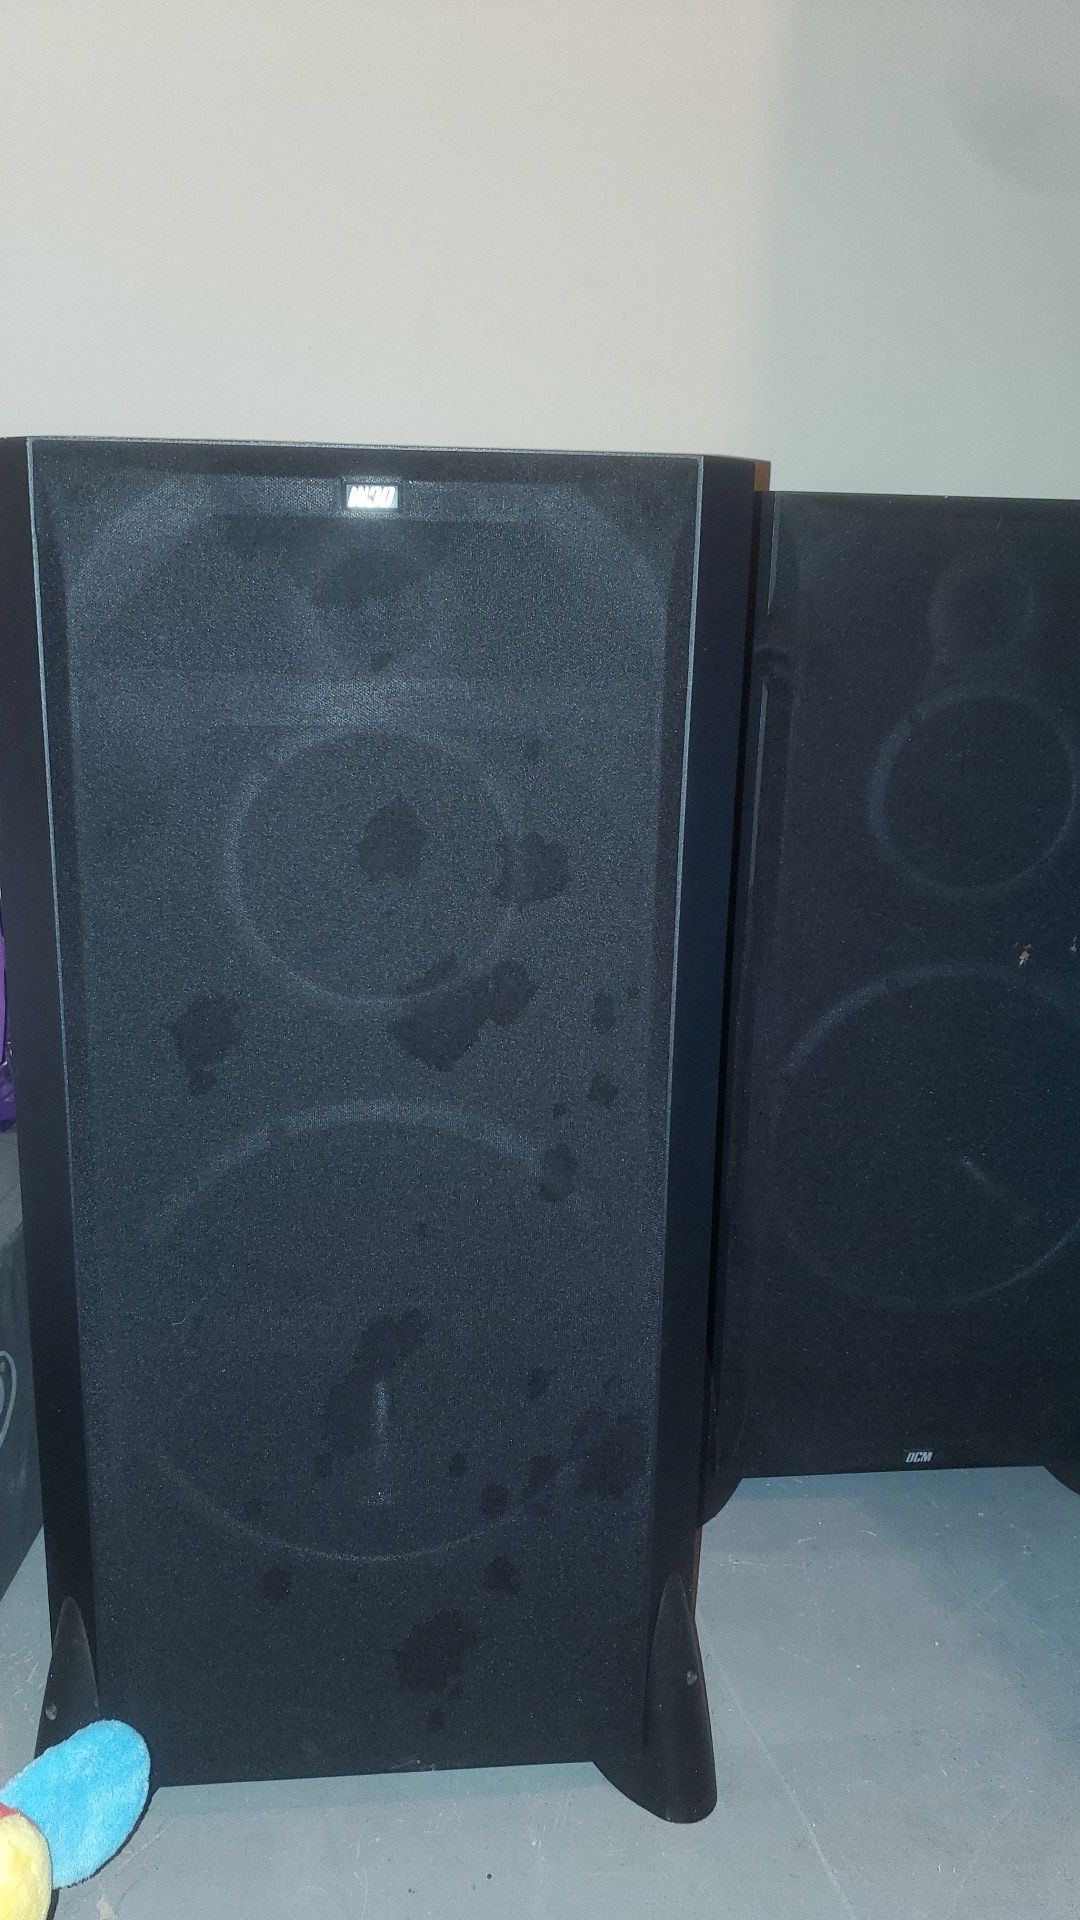 2 DCM speakers, still in great condition, but don't have the wires for it anymore. $100 OBO